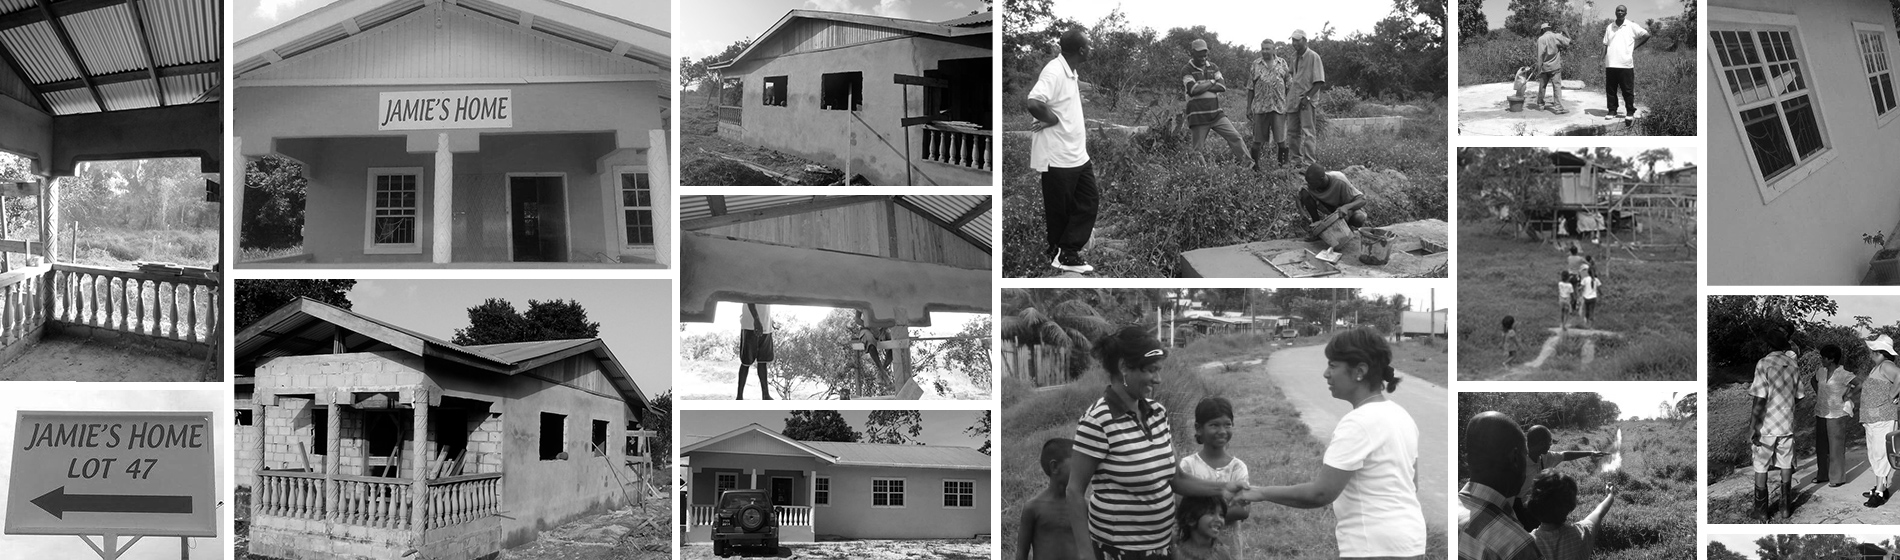 The evolution of Jamie's Home, Jesus in Action's first house in the orphanage